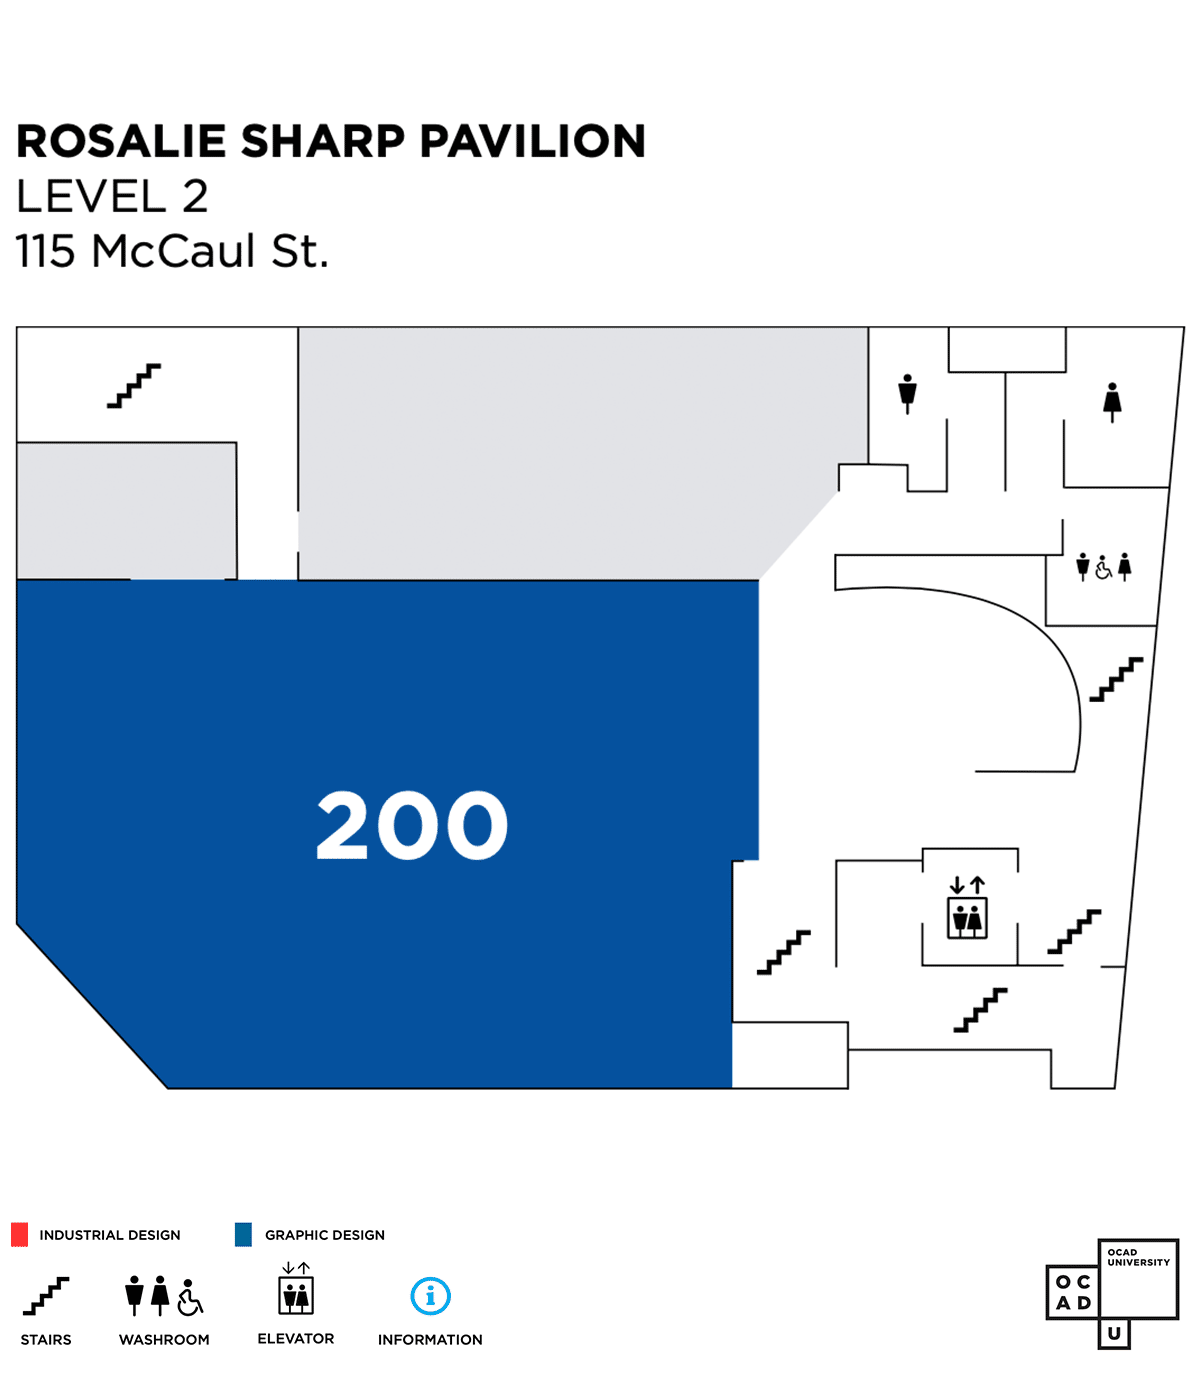 Map of 115 McCaul street level 2. Exhibitions in room 200.